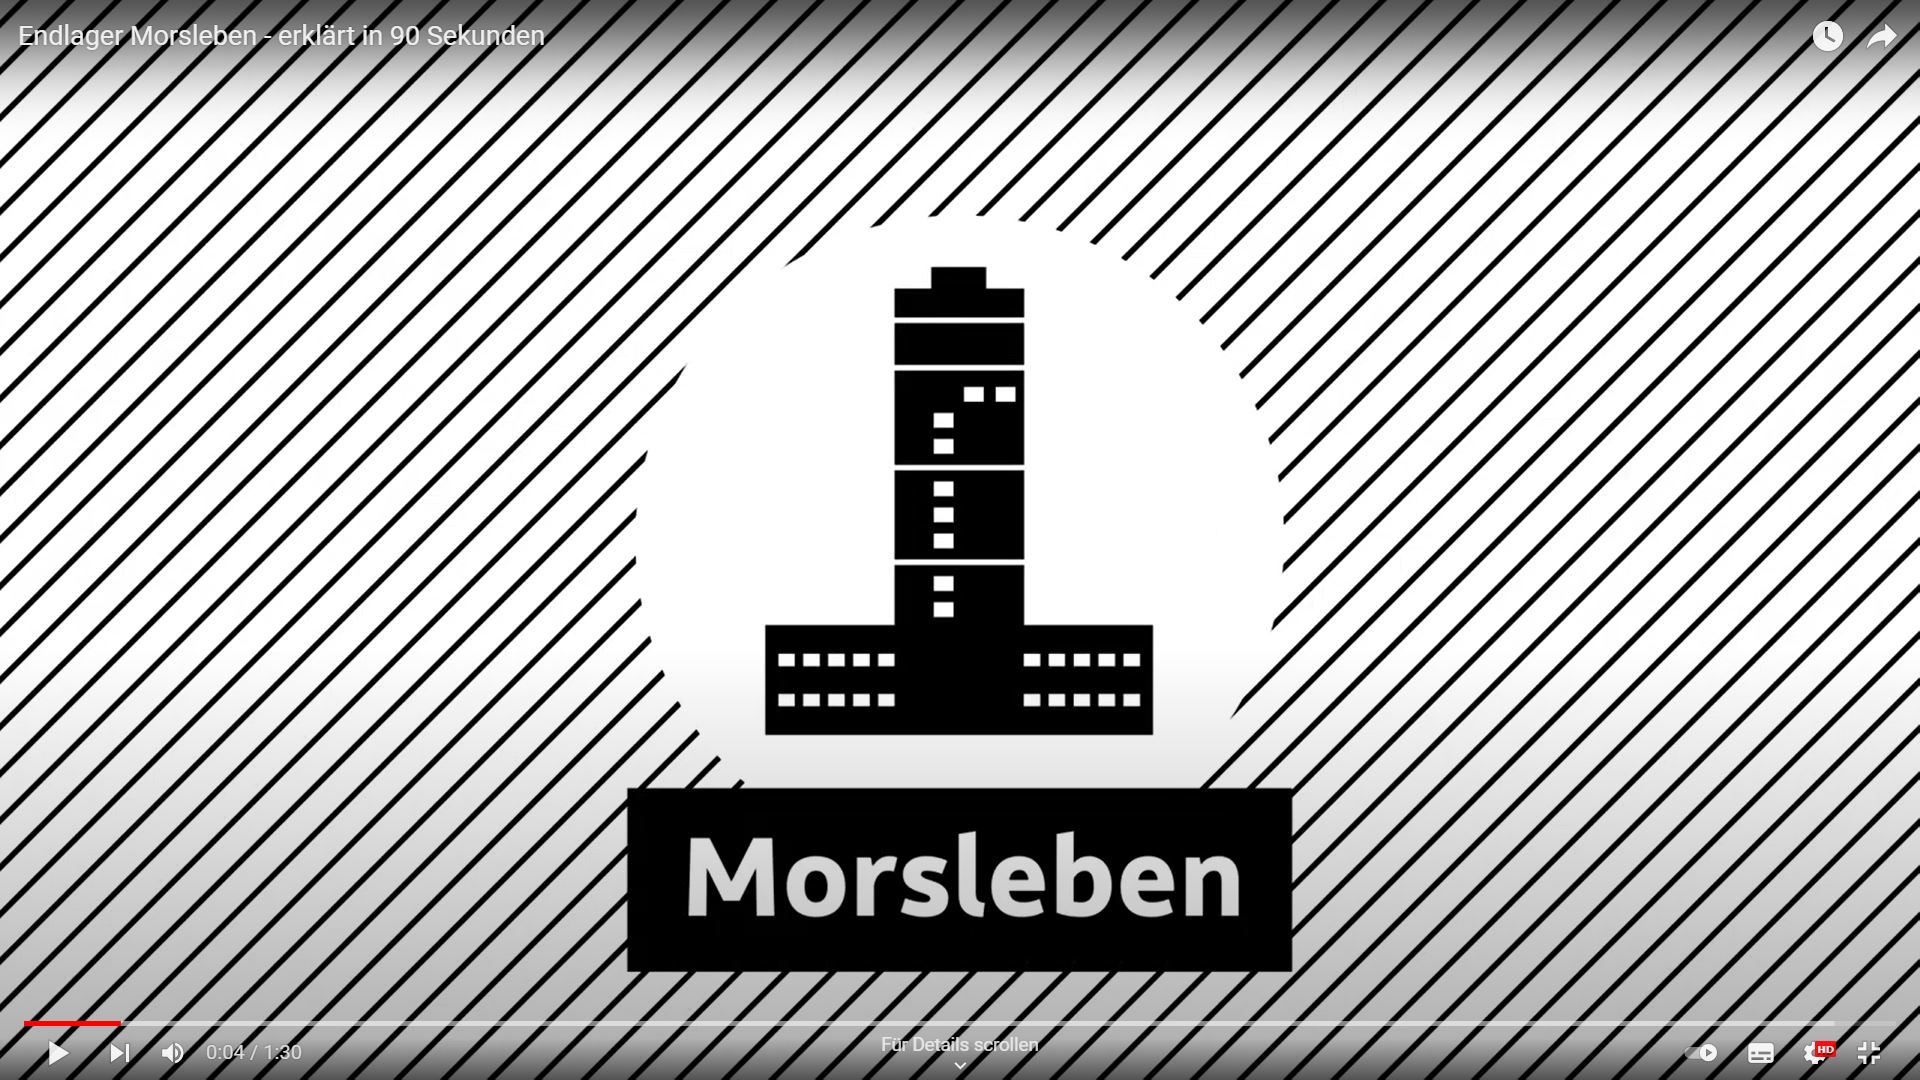 Preview image: Graphic representation of the tower of the Morsleben repository in black and white